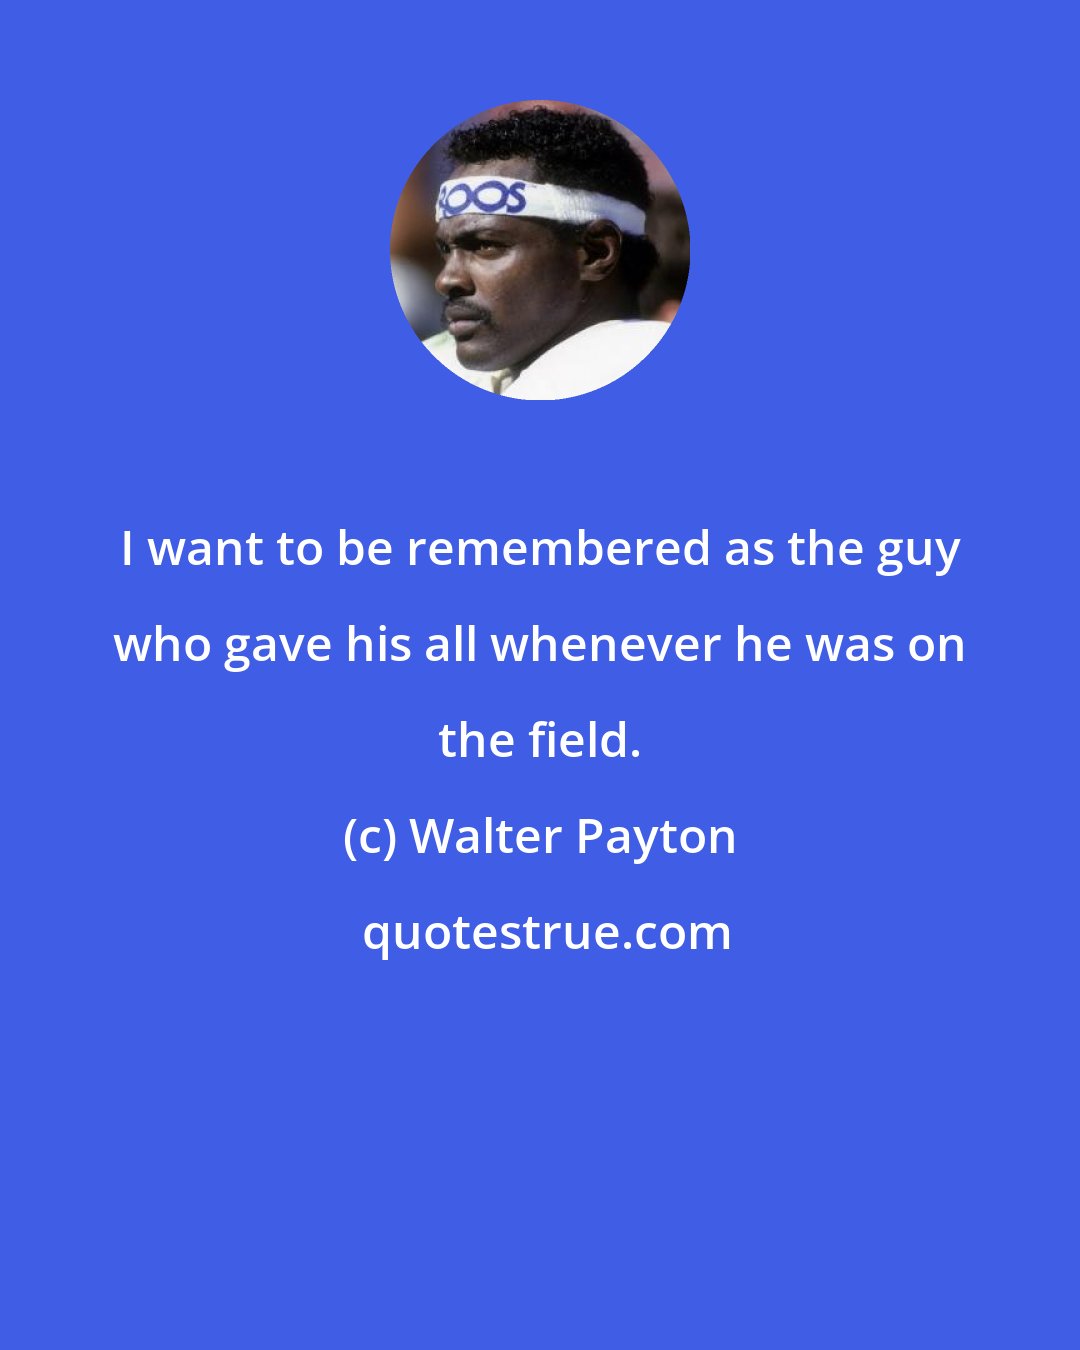 Walter Payton: I want to be remembered as the guy who gave his all whenever he was on the field.